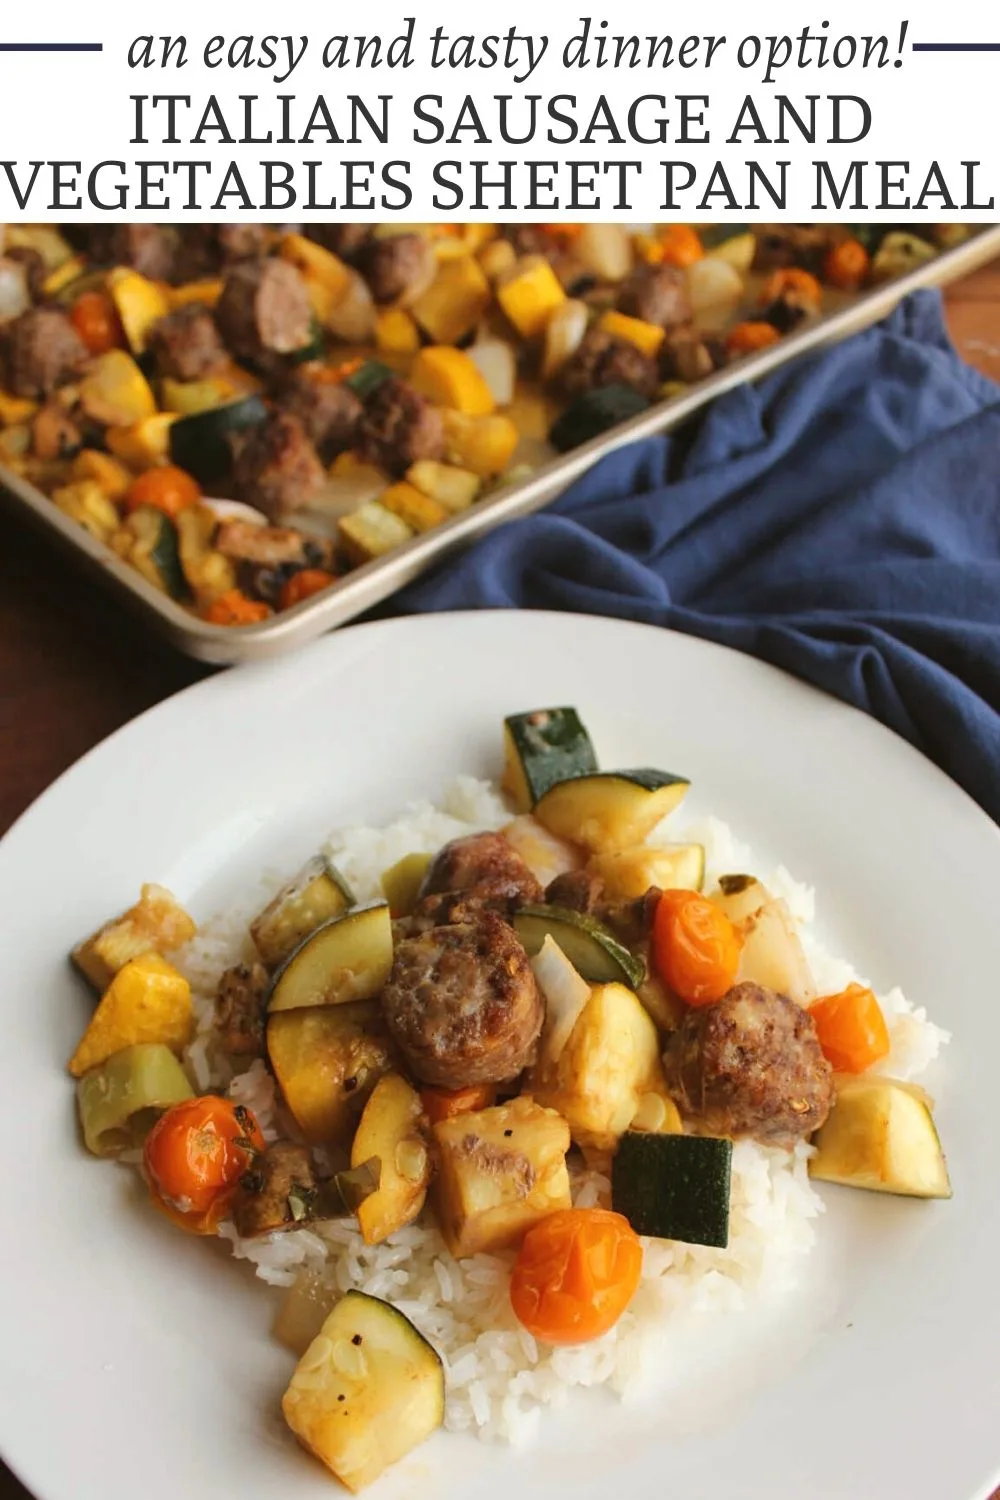 This dinner is full of flavor and fresh summer vegetables, making it a perfect easy sheet pan meal. The sausage gives so much flavor the to vegetables and together they are hearty and delicious. Serve it over rice or pasta and dinner is done.